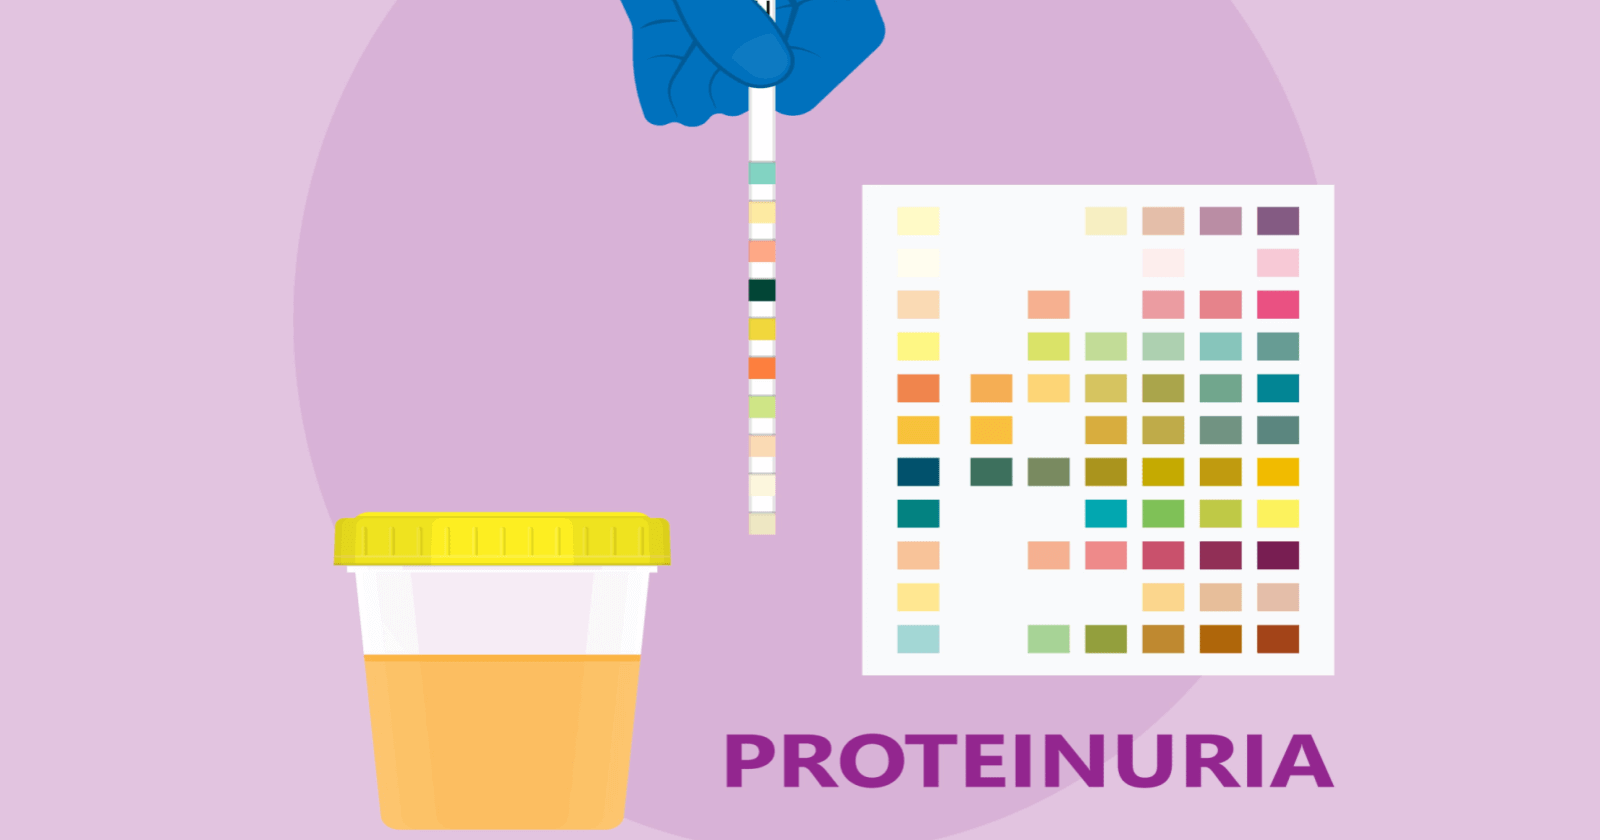 Protein in urine (Proteinuria): Meaning, symptoms, causes, and other details